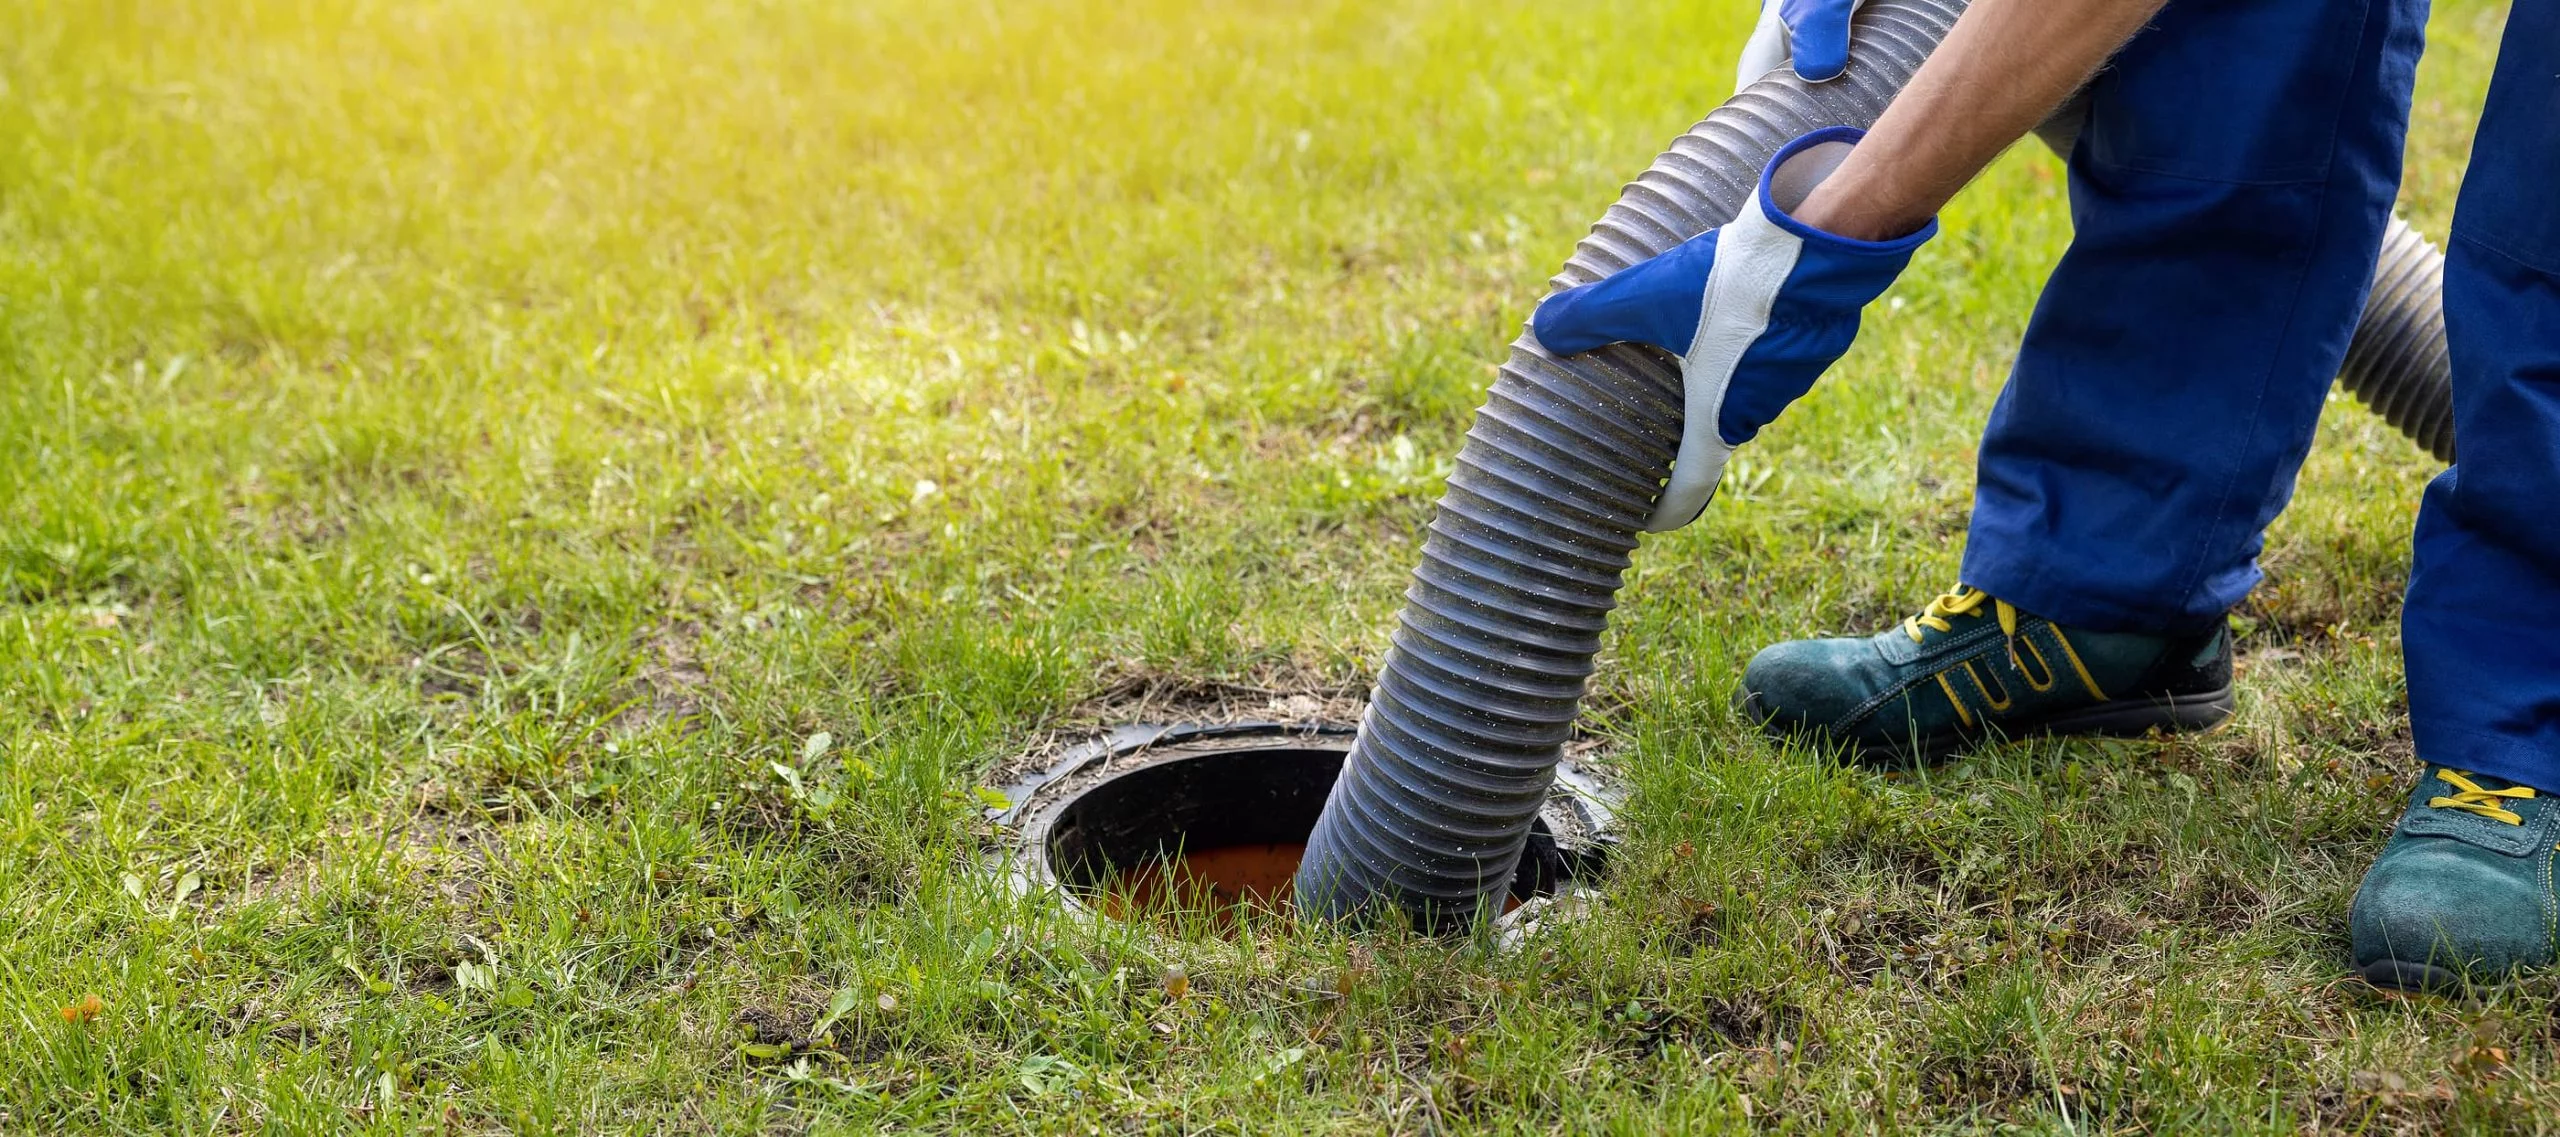 Does Homeowners Insurance Cover Septic Tanks?